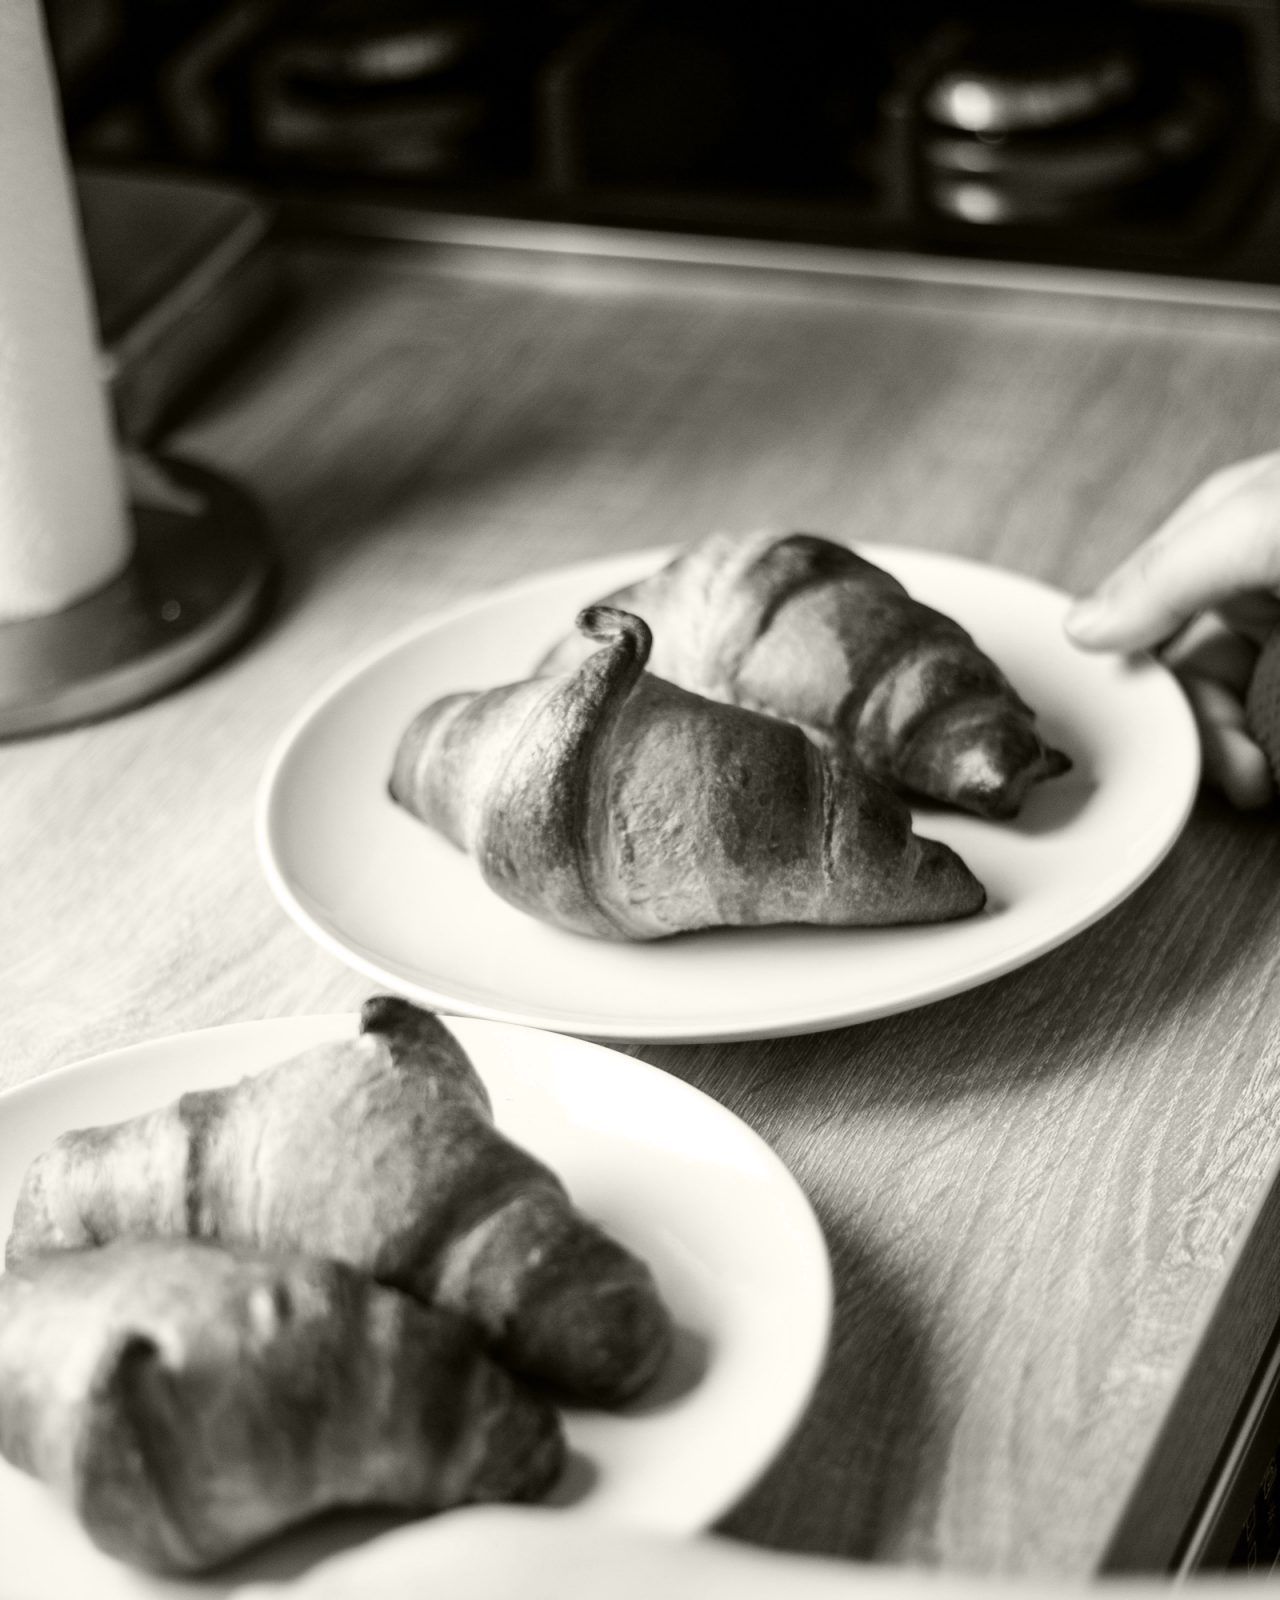 Black and white table with two plates of two croissants on each